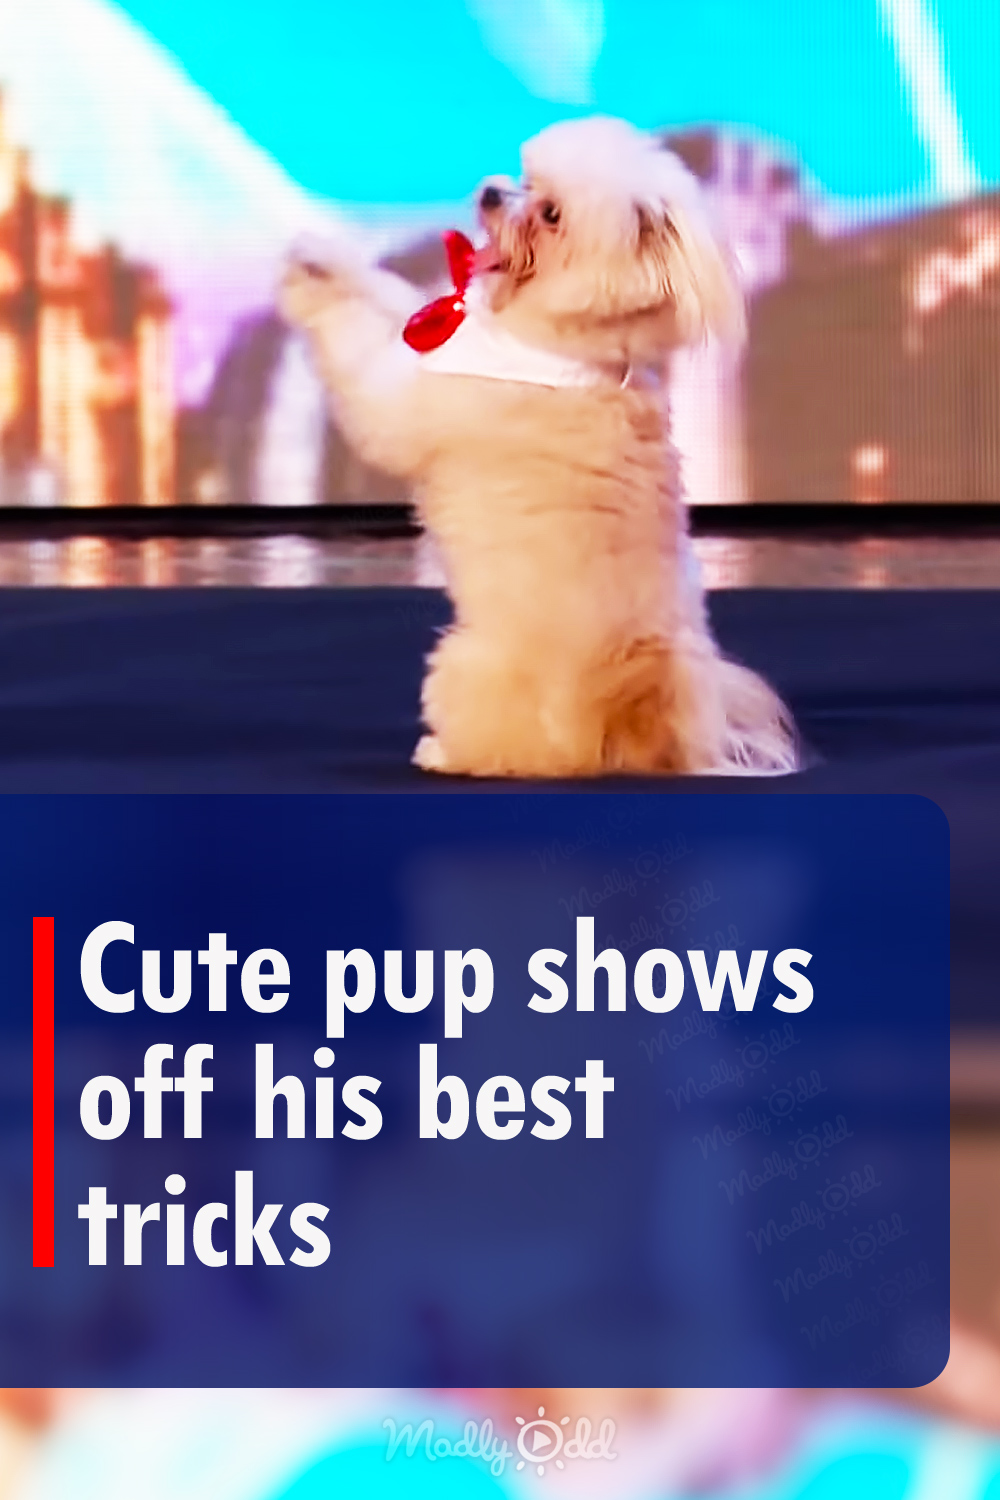 Cute pup shows off his best tricks